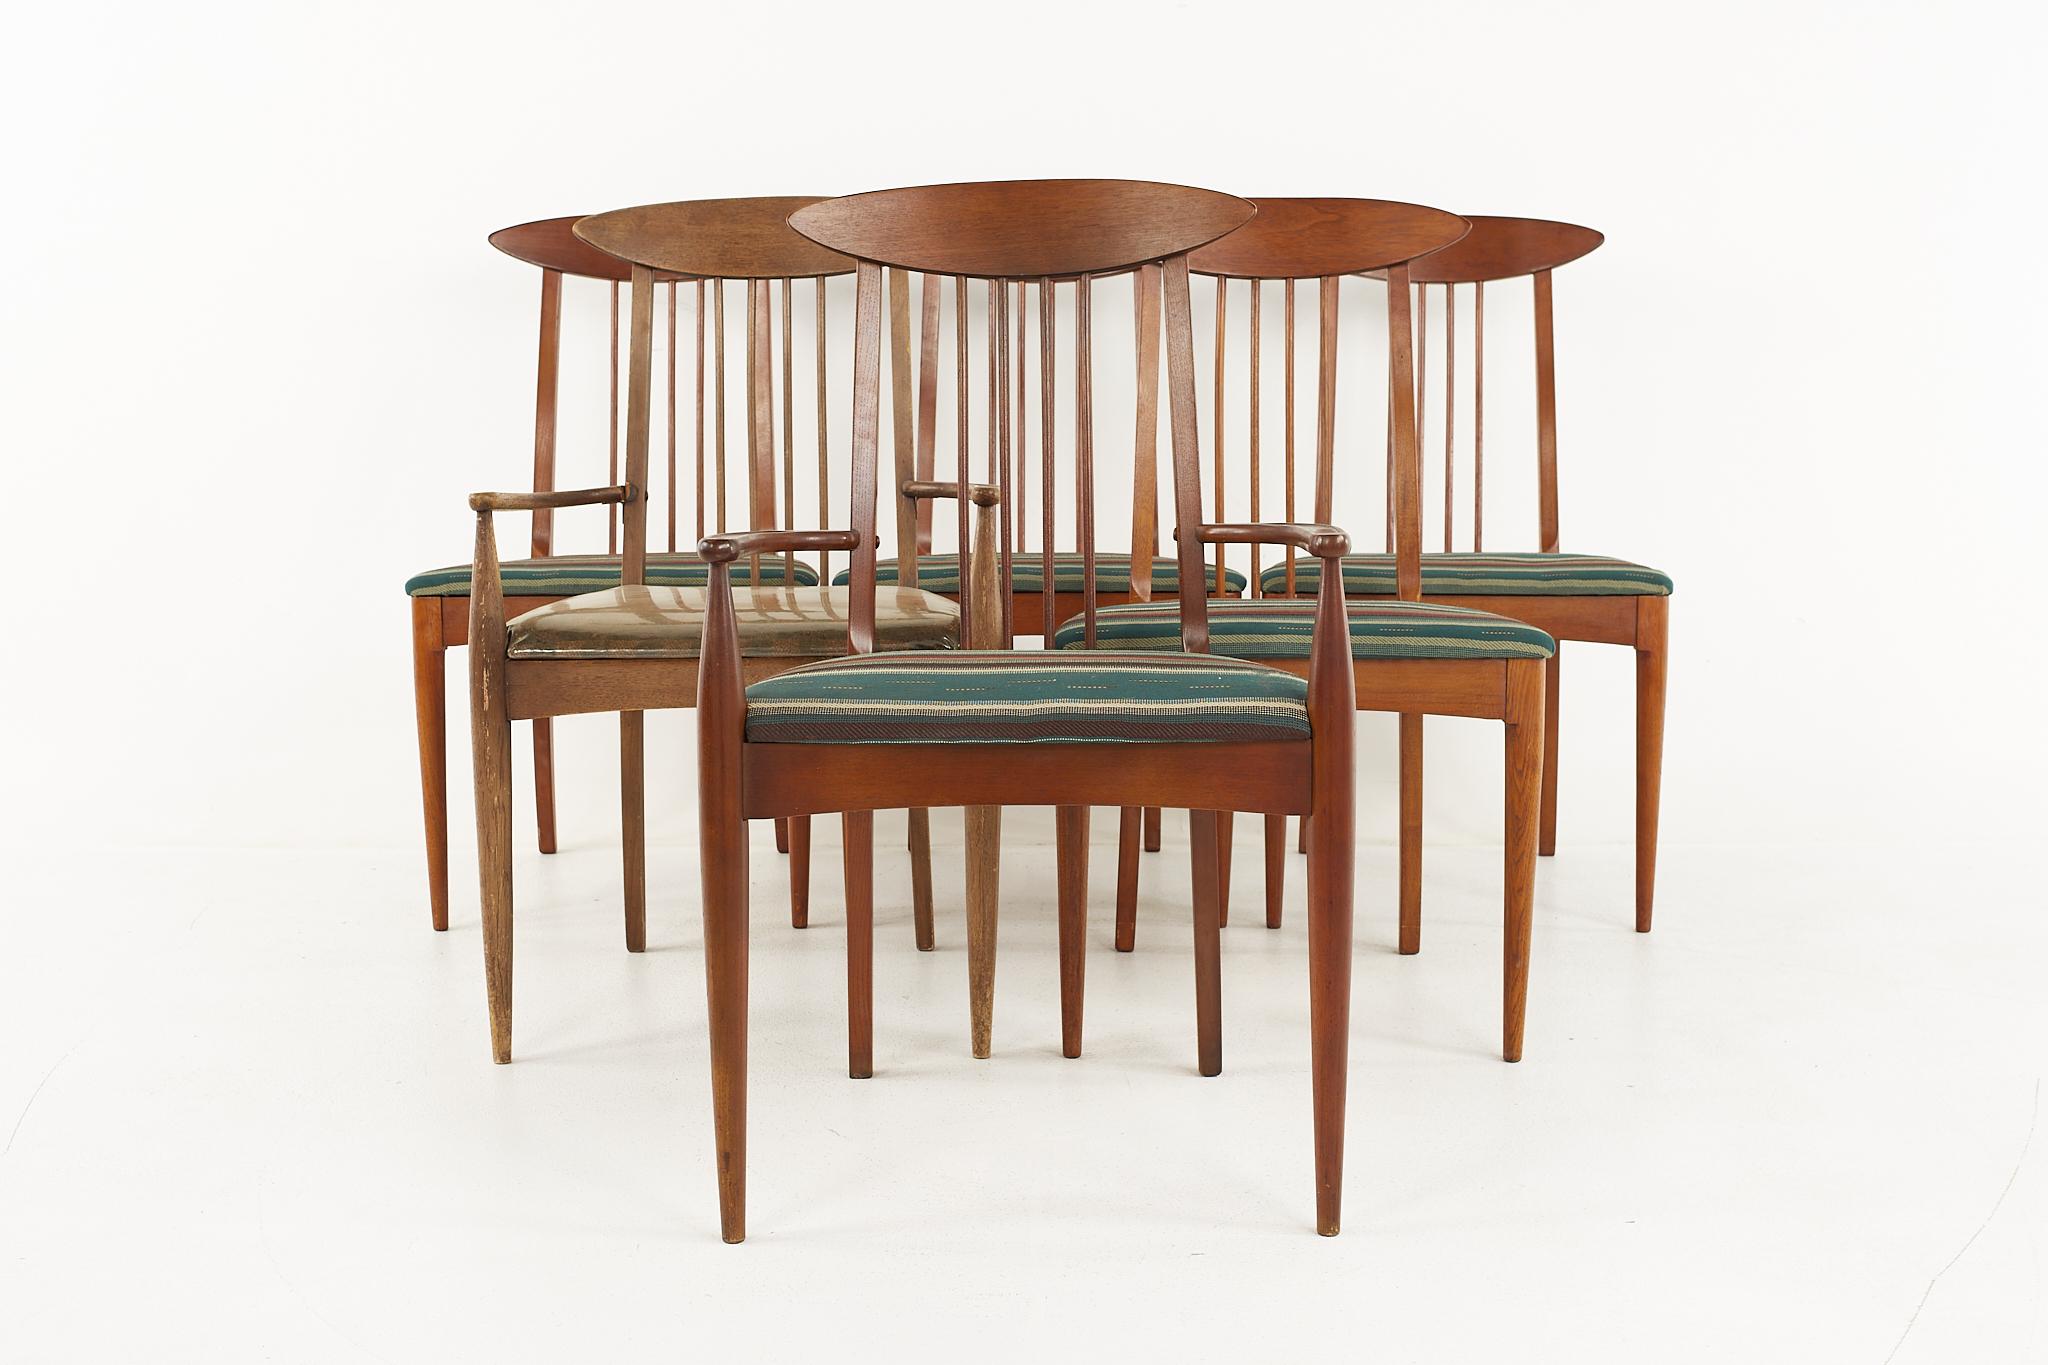 Broyhill Sculptra Brutalist mid century cats eye dining chairs - set of 6a

Each chair measures: 18 wide x 18 deep x 35.5 high, with a seat height of 17 inches

All pieces of furniture can be had in what we call restored vintage condition. That